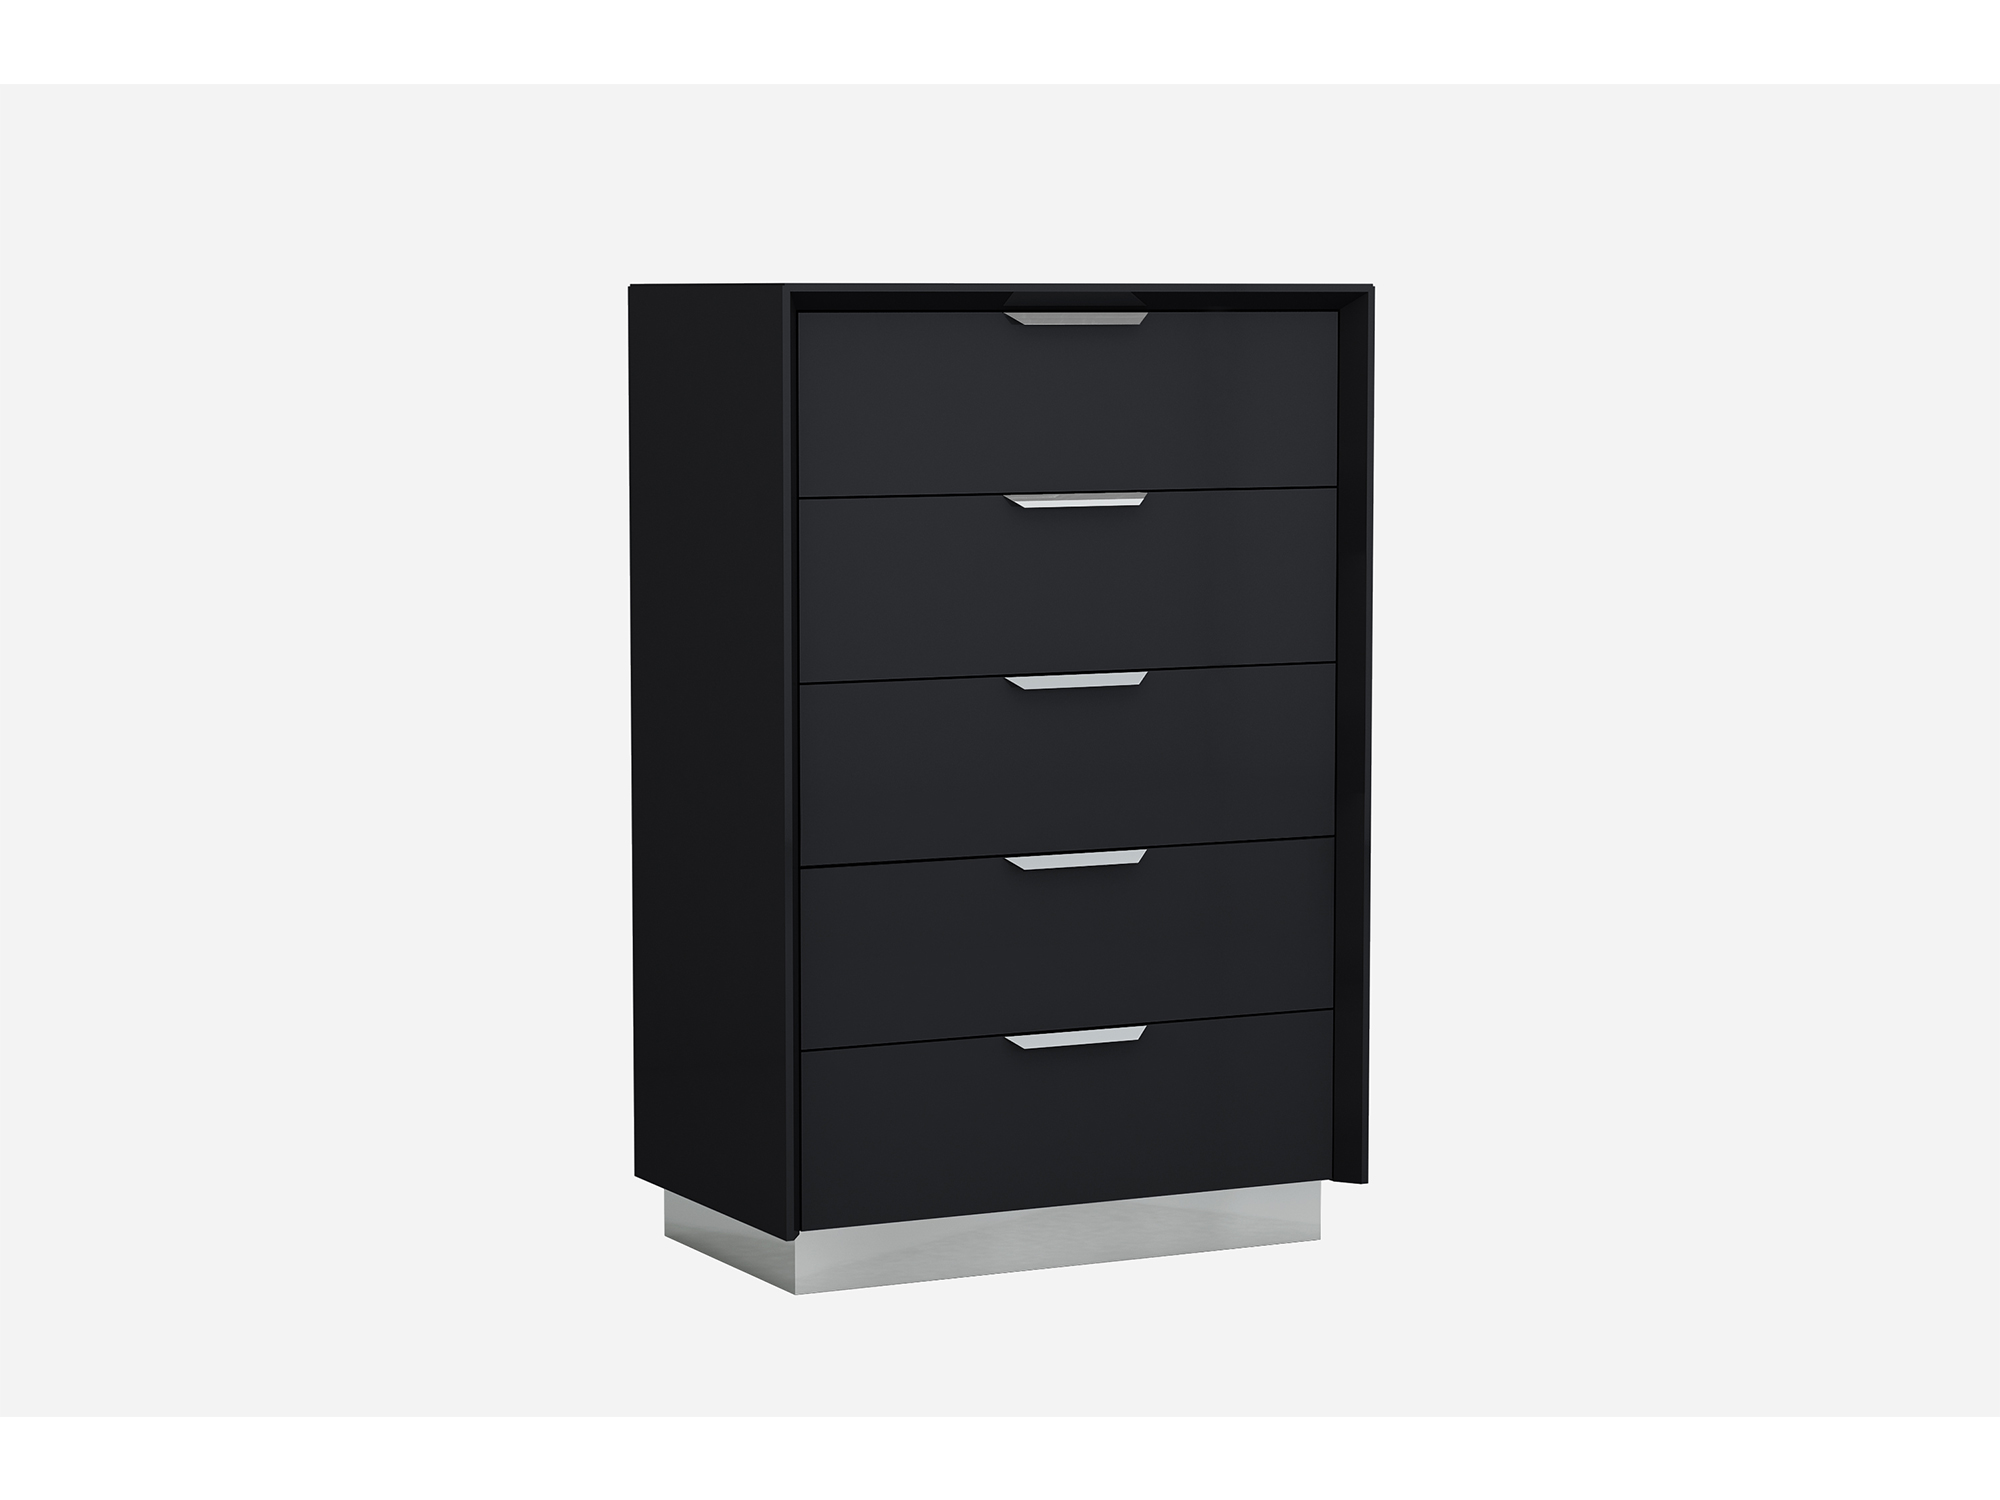 33" X 19" X 49" Black Stainless Steel Drawer Chest